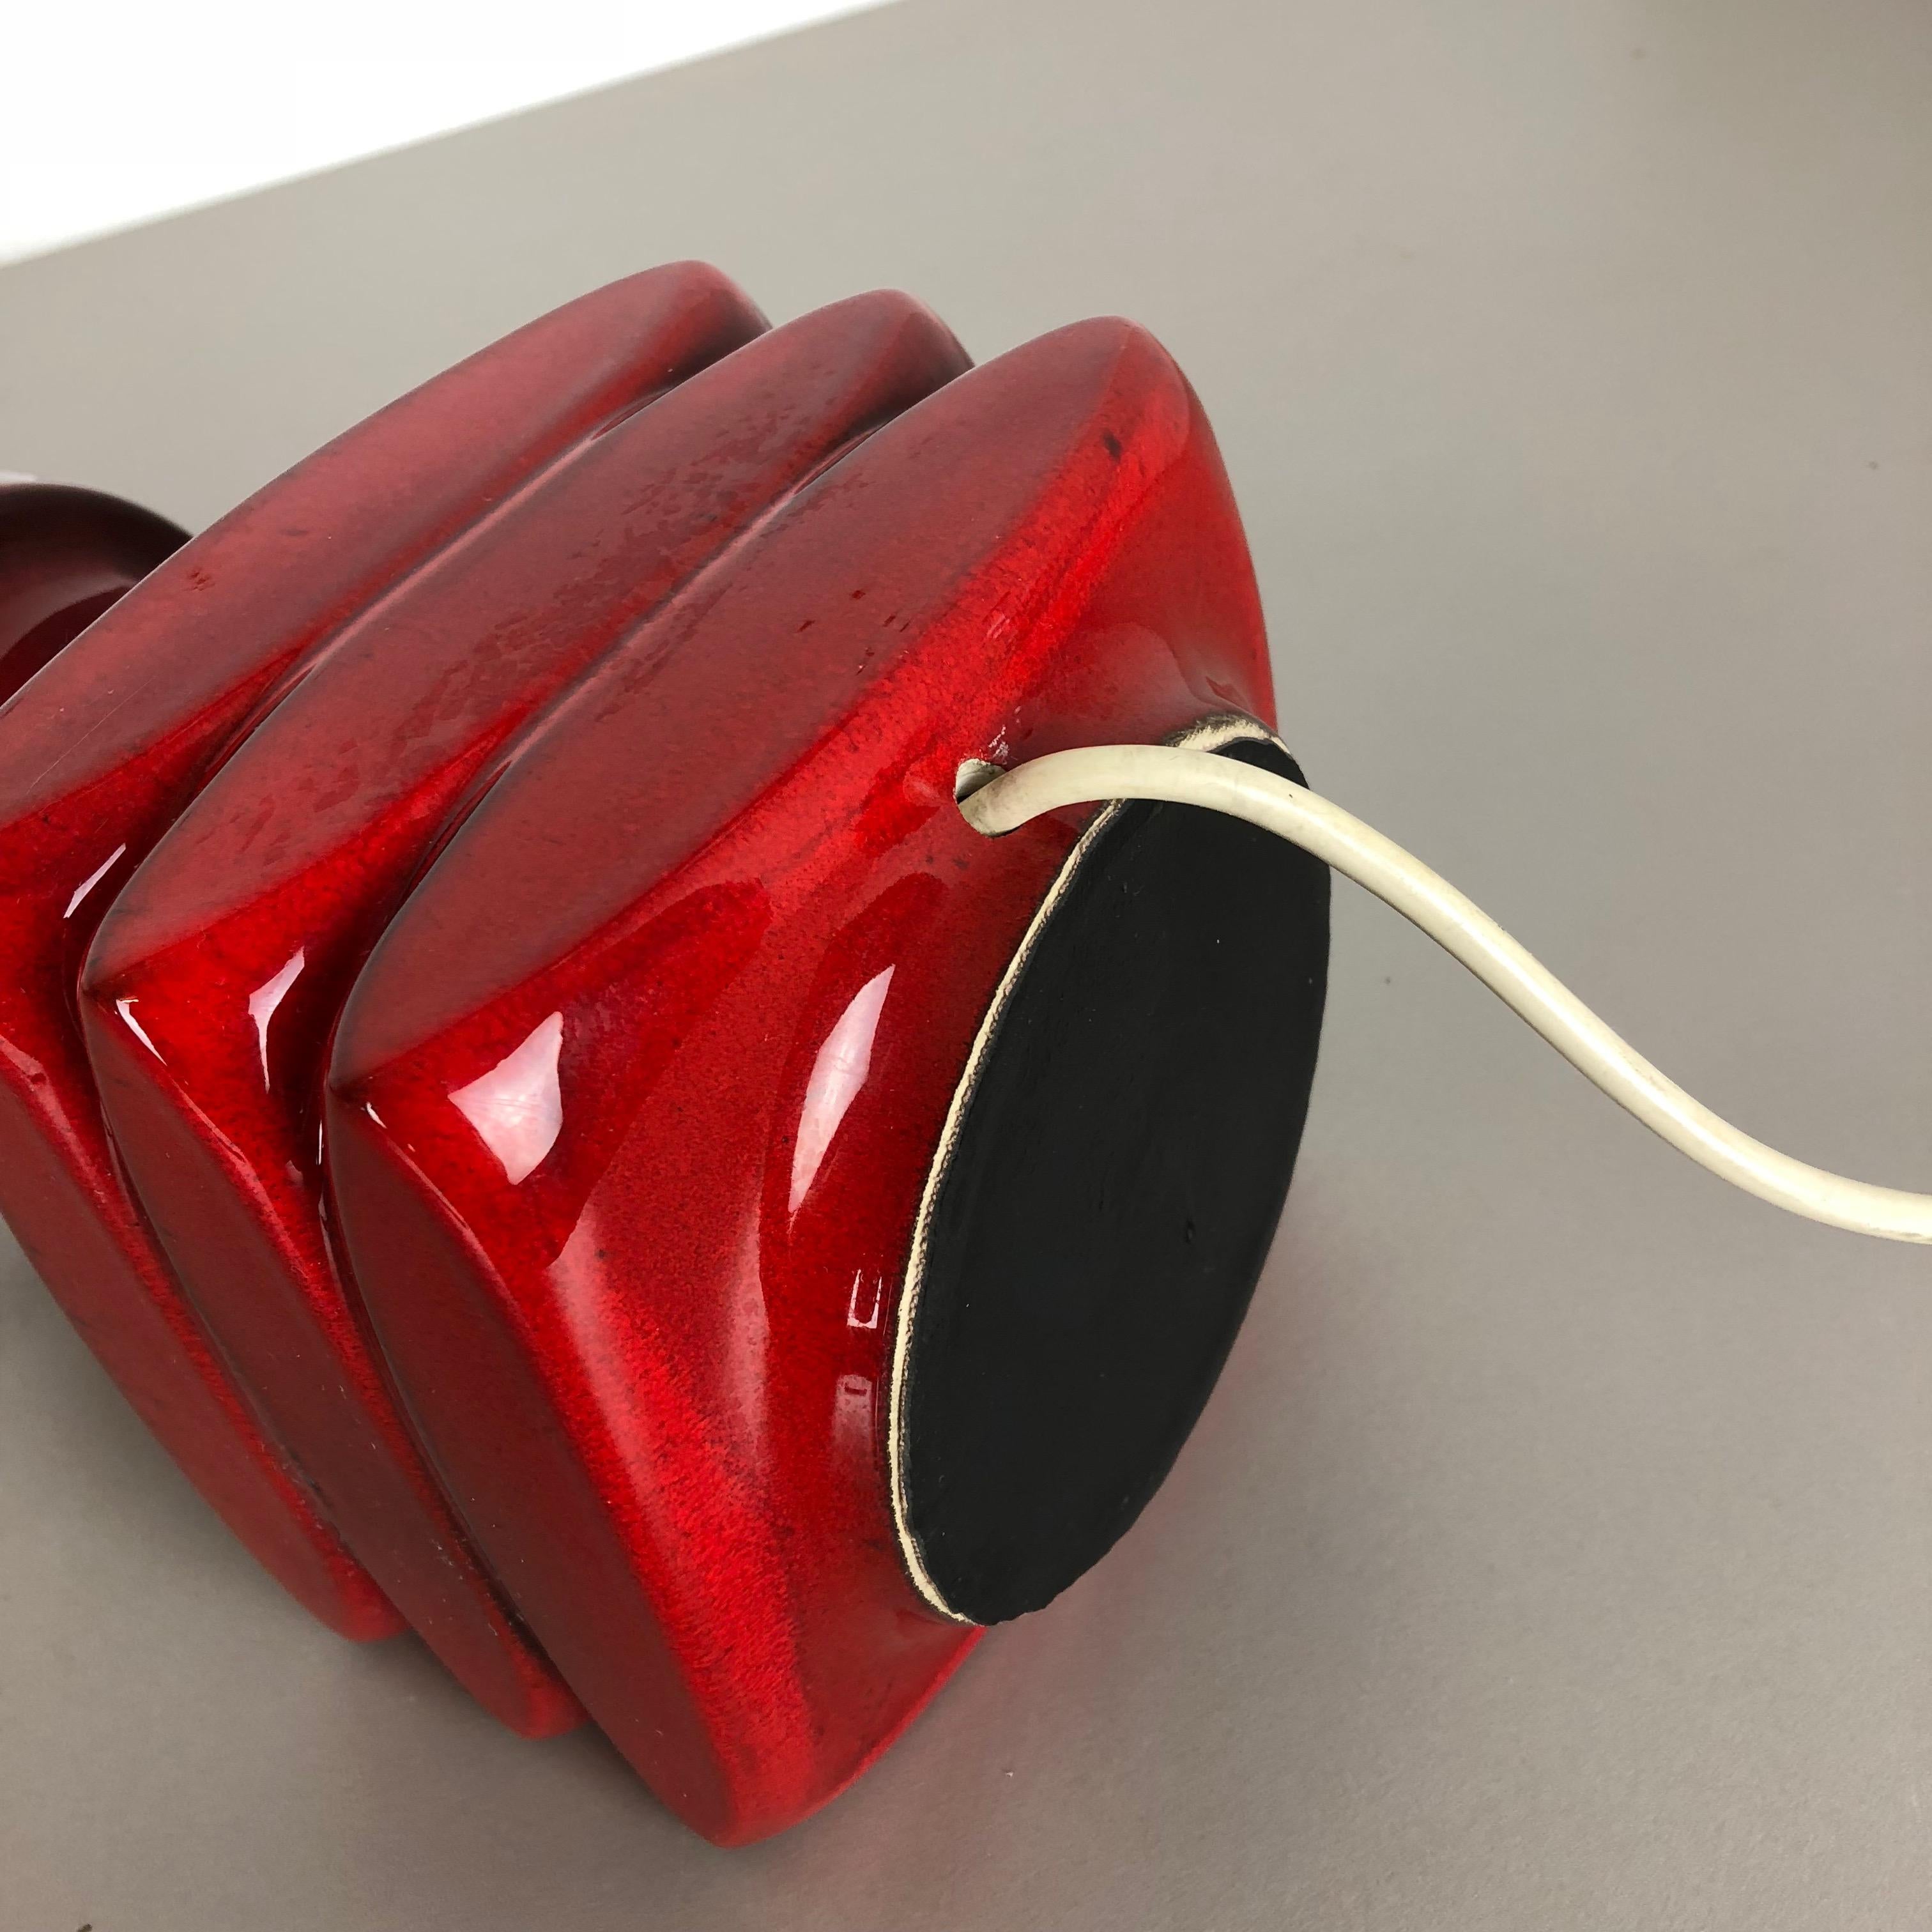 Red Ceramic Studio Pottery Table Light by Cari Zalloni for Fohr, Germany 1970s For Sale 3